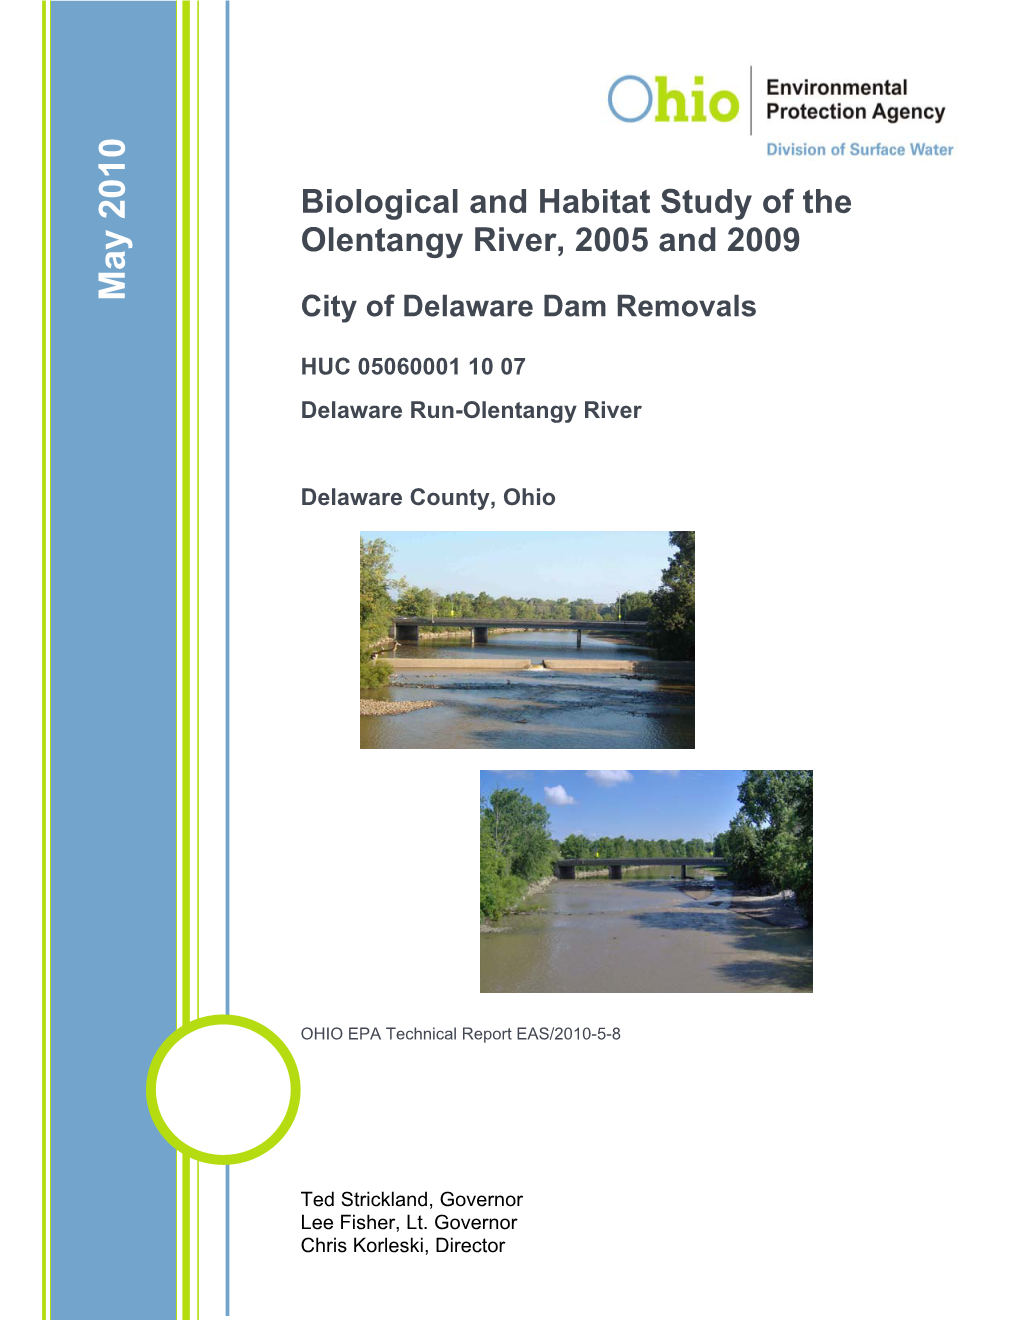 Biological and Habitat Study of the Olentangy River, 2005